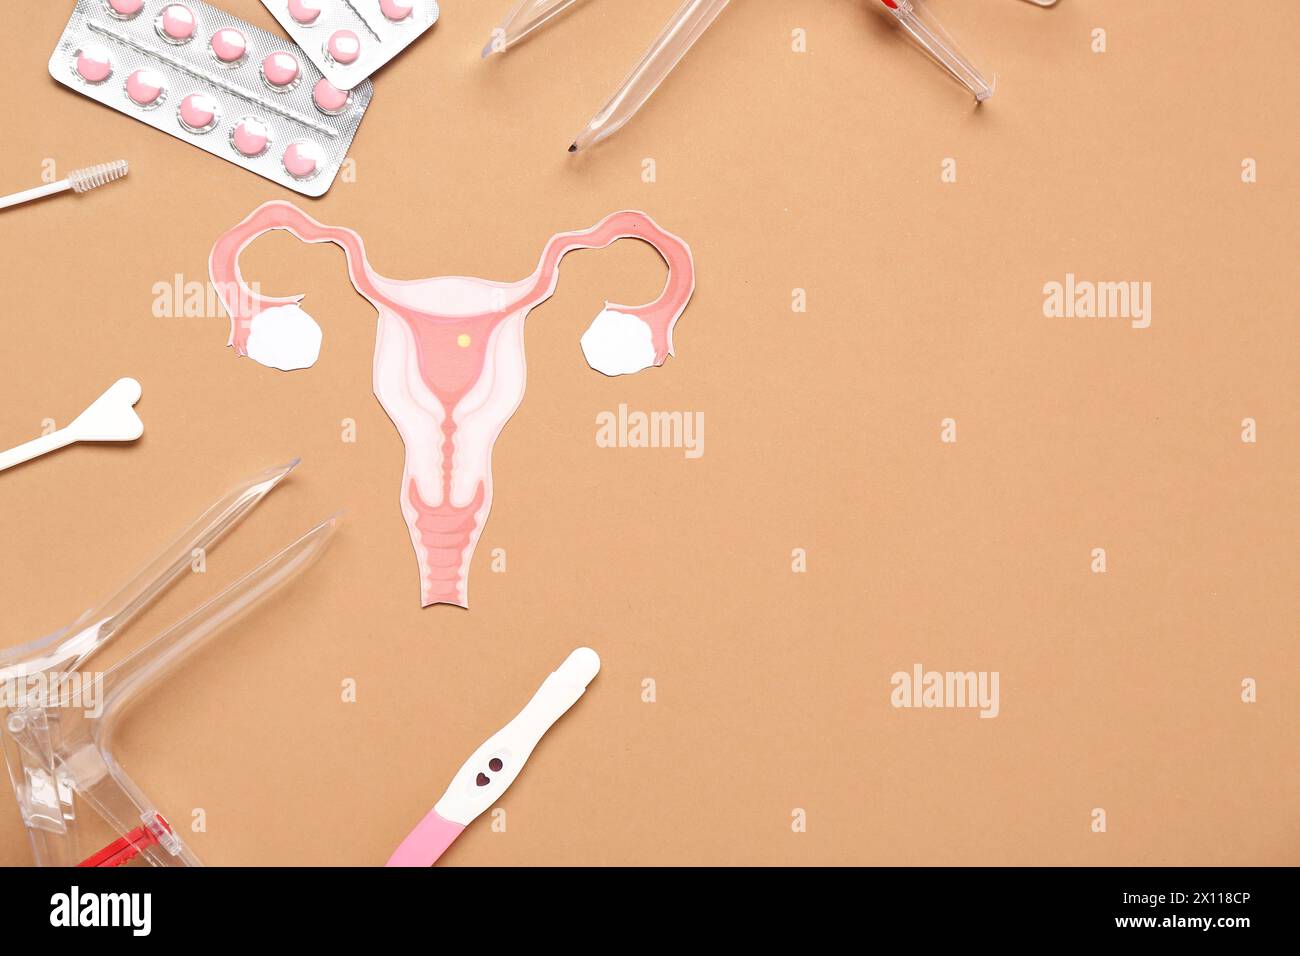 Paper uterus with gynecological speculums, pills and pap smear test tools on brown background Stock Photo